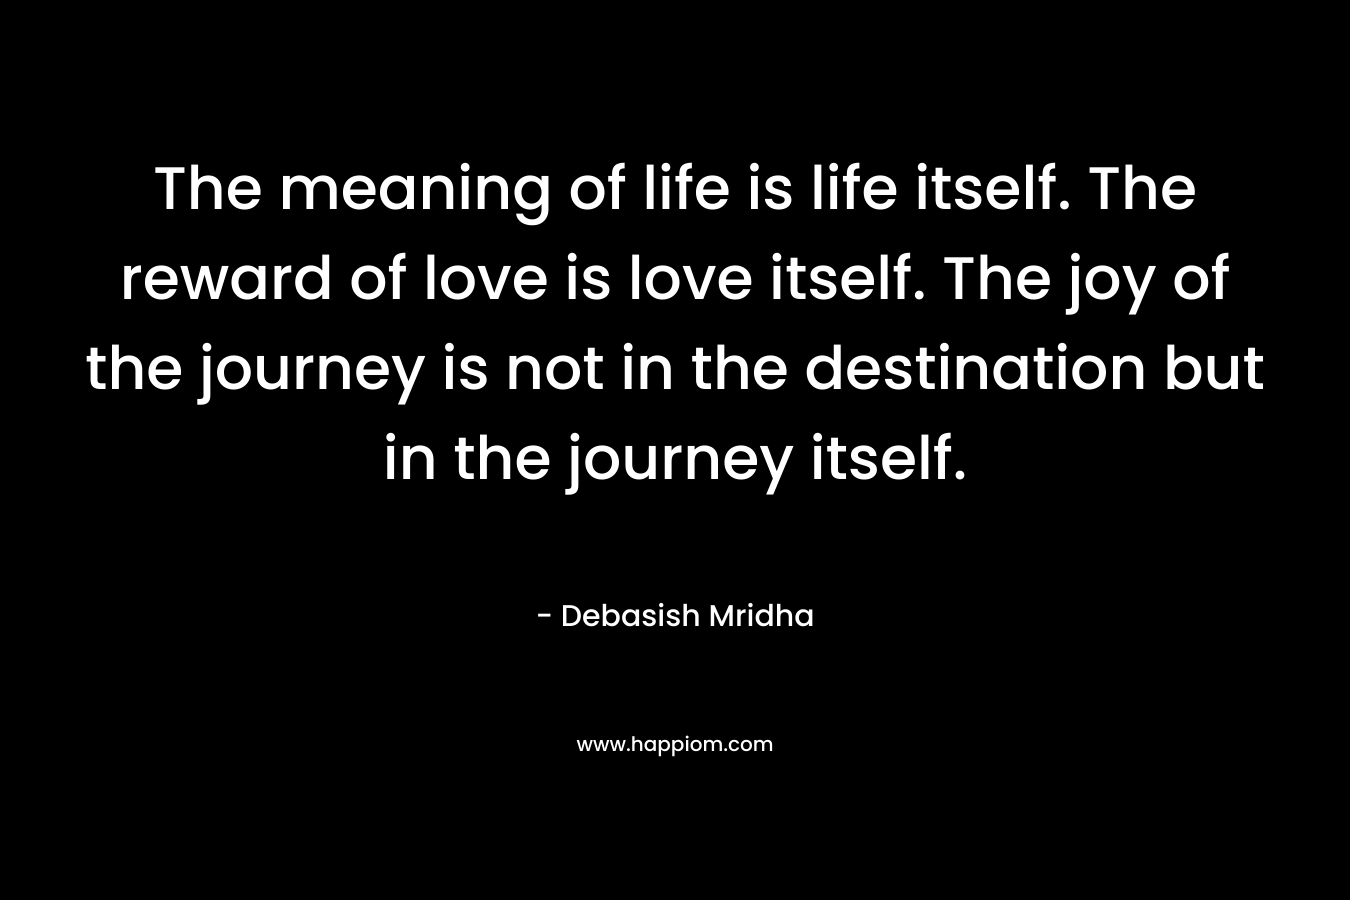 The meaning of life is life itself. The reward of love is love itself. The joy of the journey is not in the destination but in the journey itself.